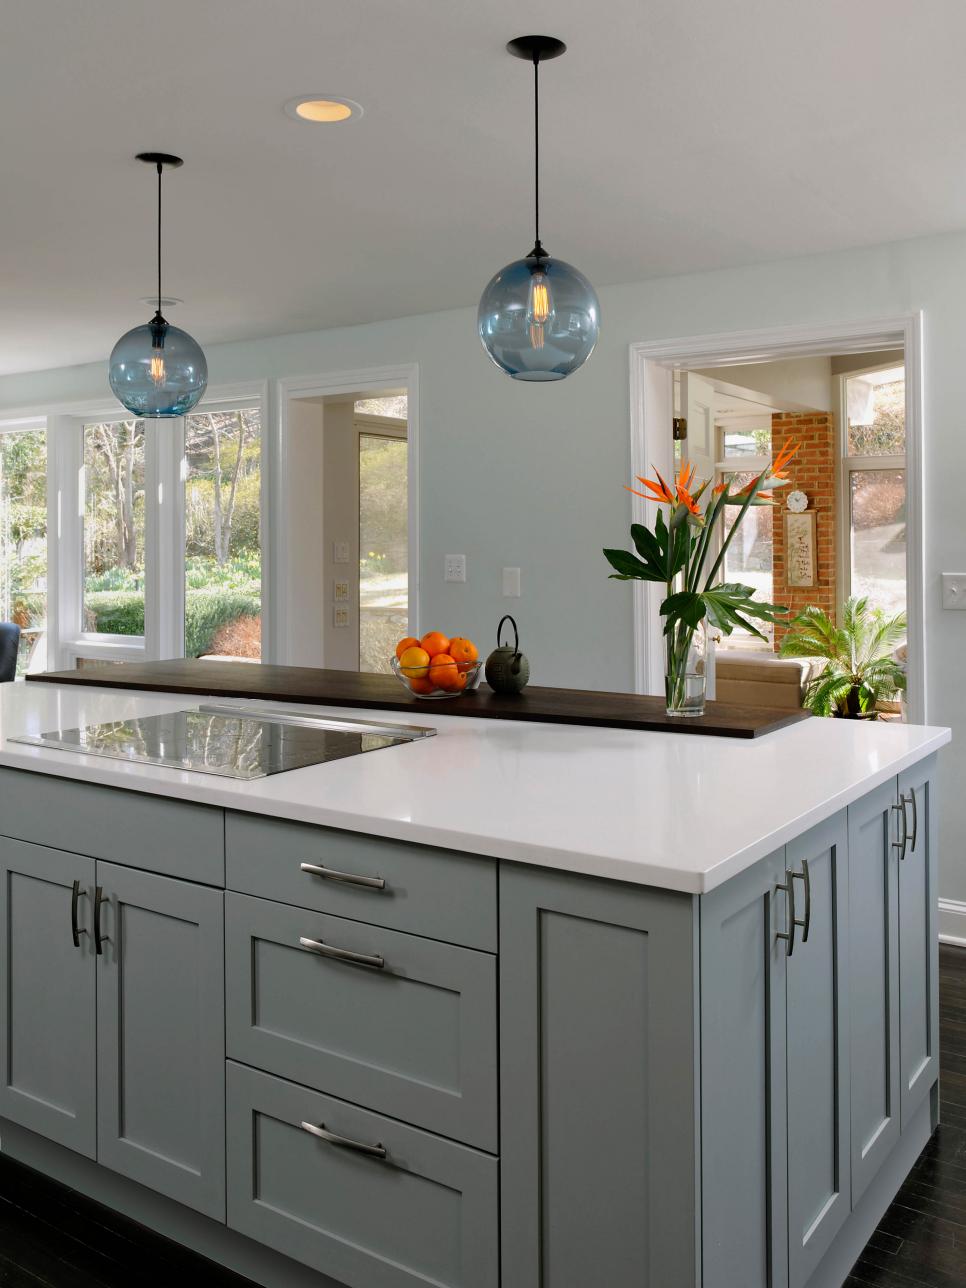 Family-Friendly Island With Blue Cabinetry and Globe Pendant Lighting